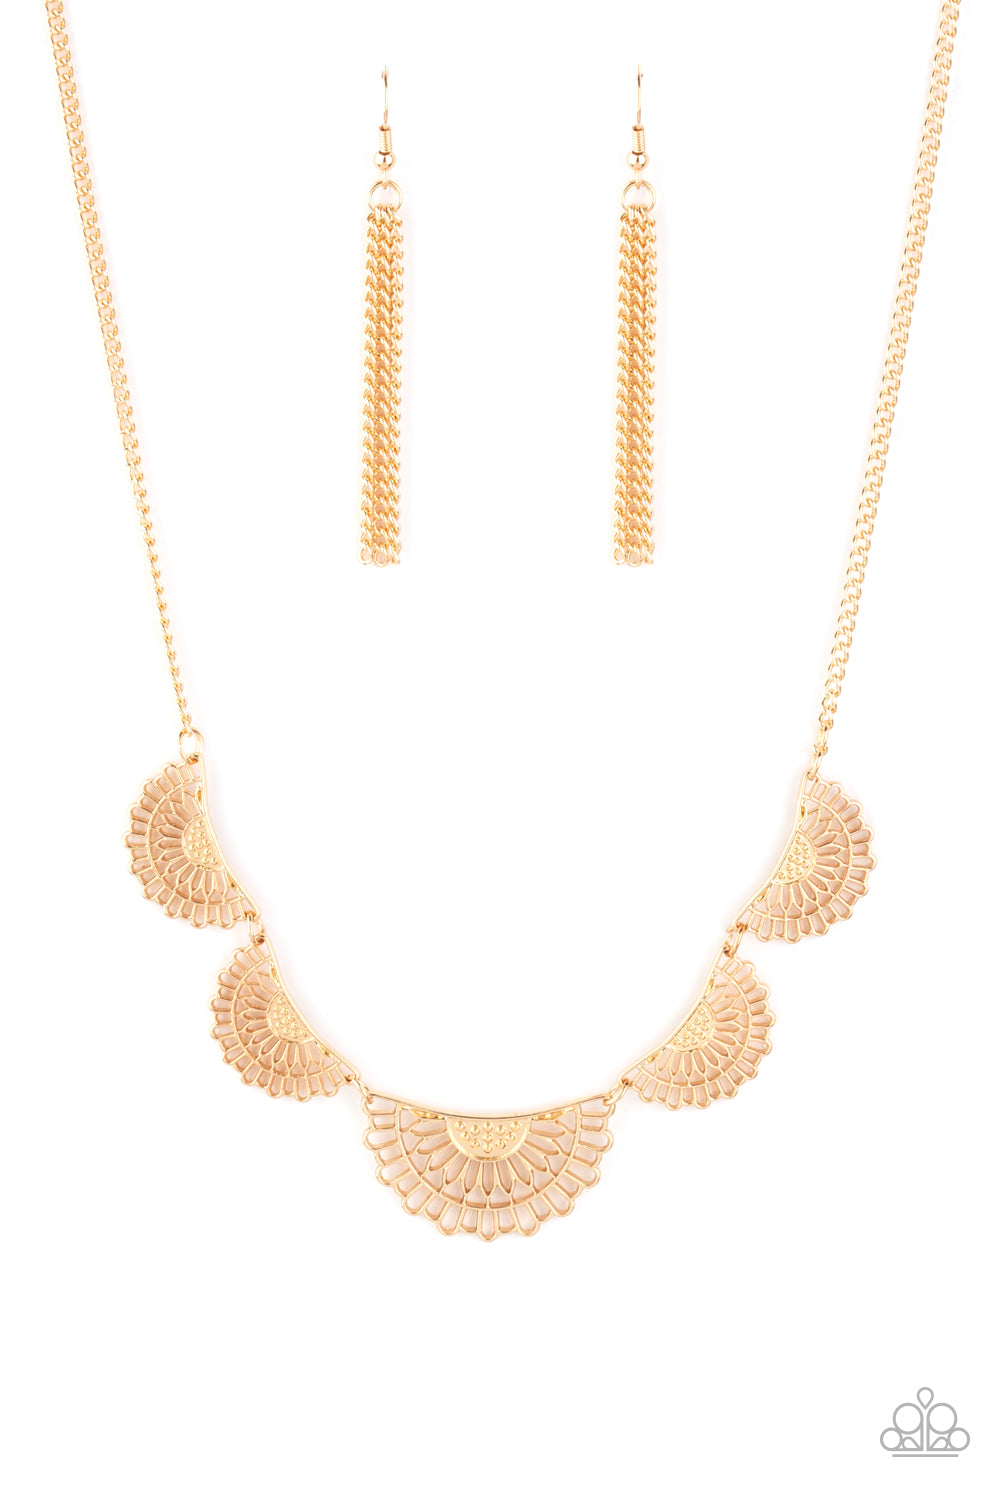 Fanned Out Fashion - Gold - Bella Bling by Natalie